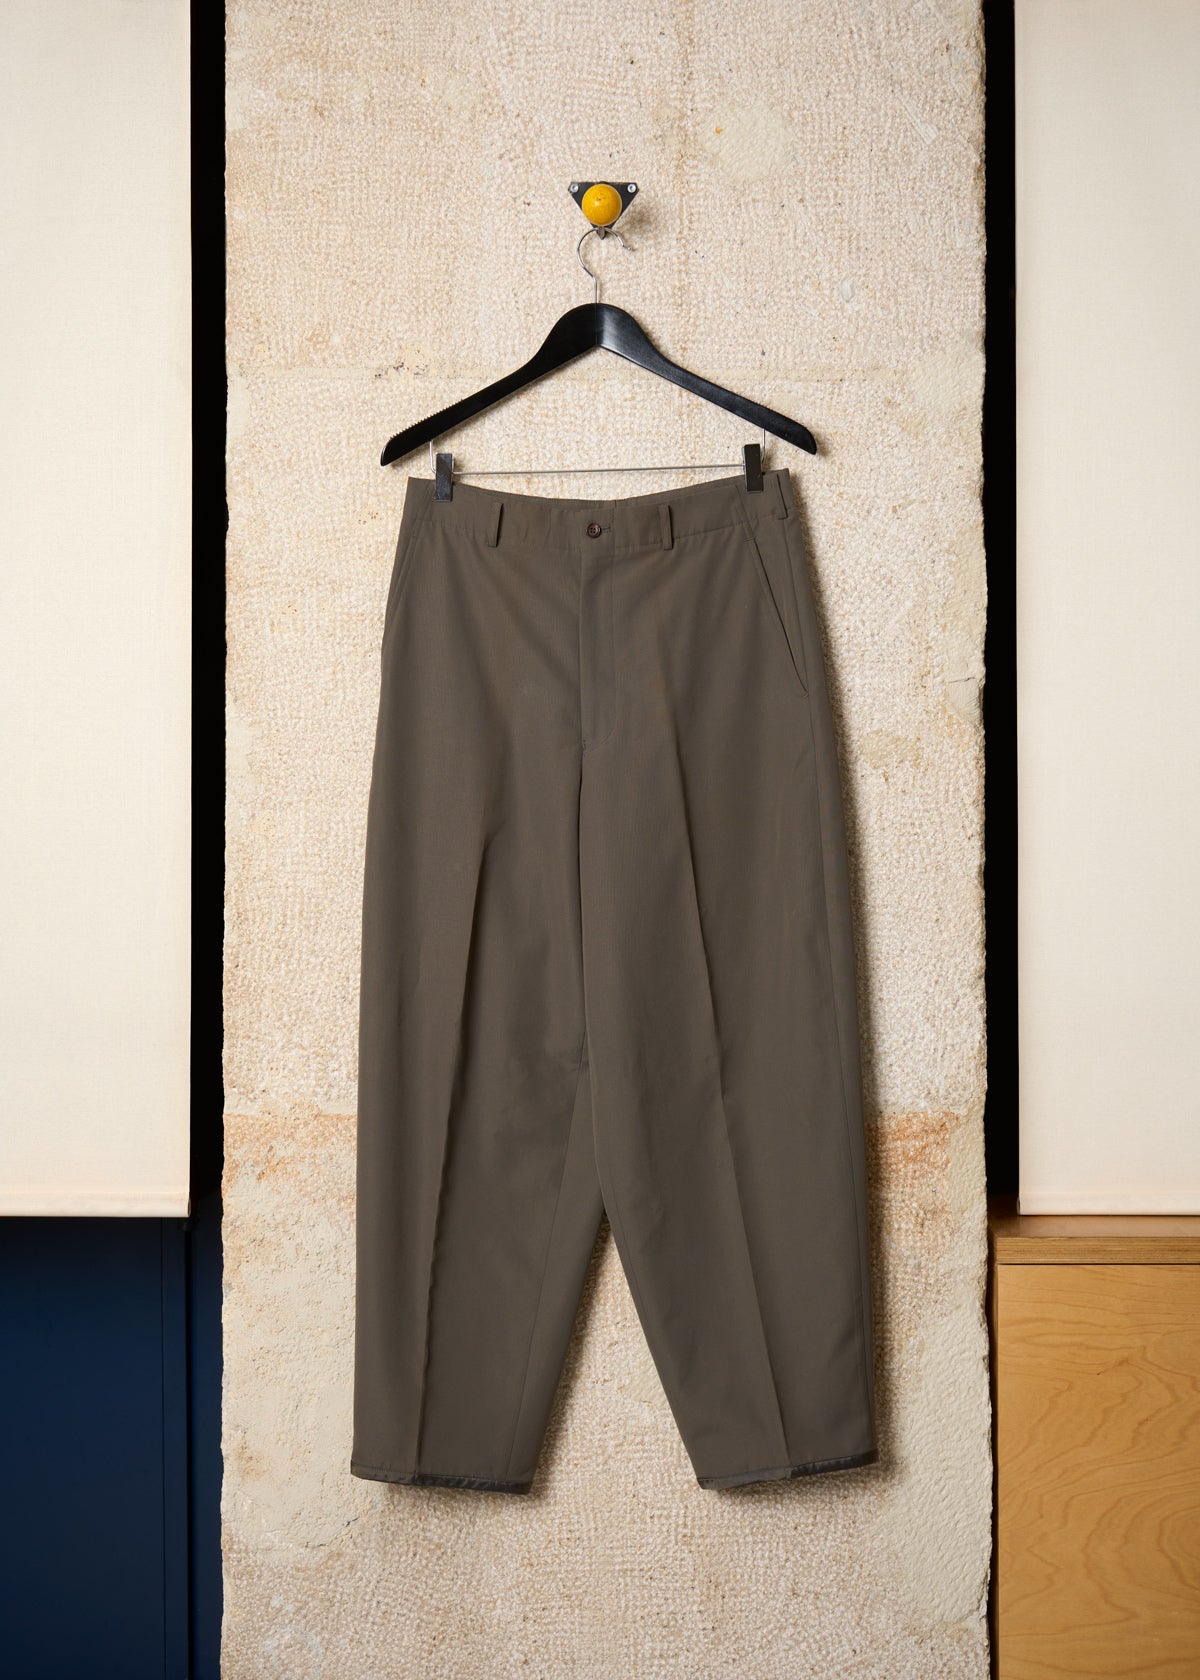 CDG Homme Olive Poly Rayon Relax Pants 1996 - Medium